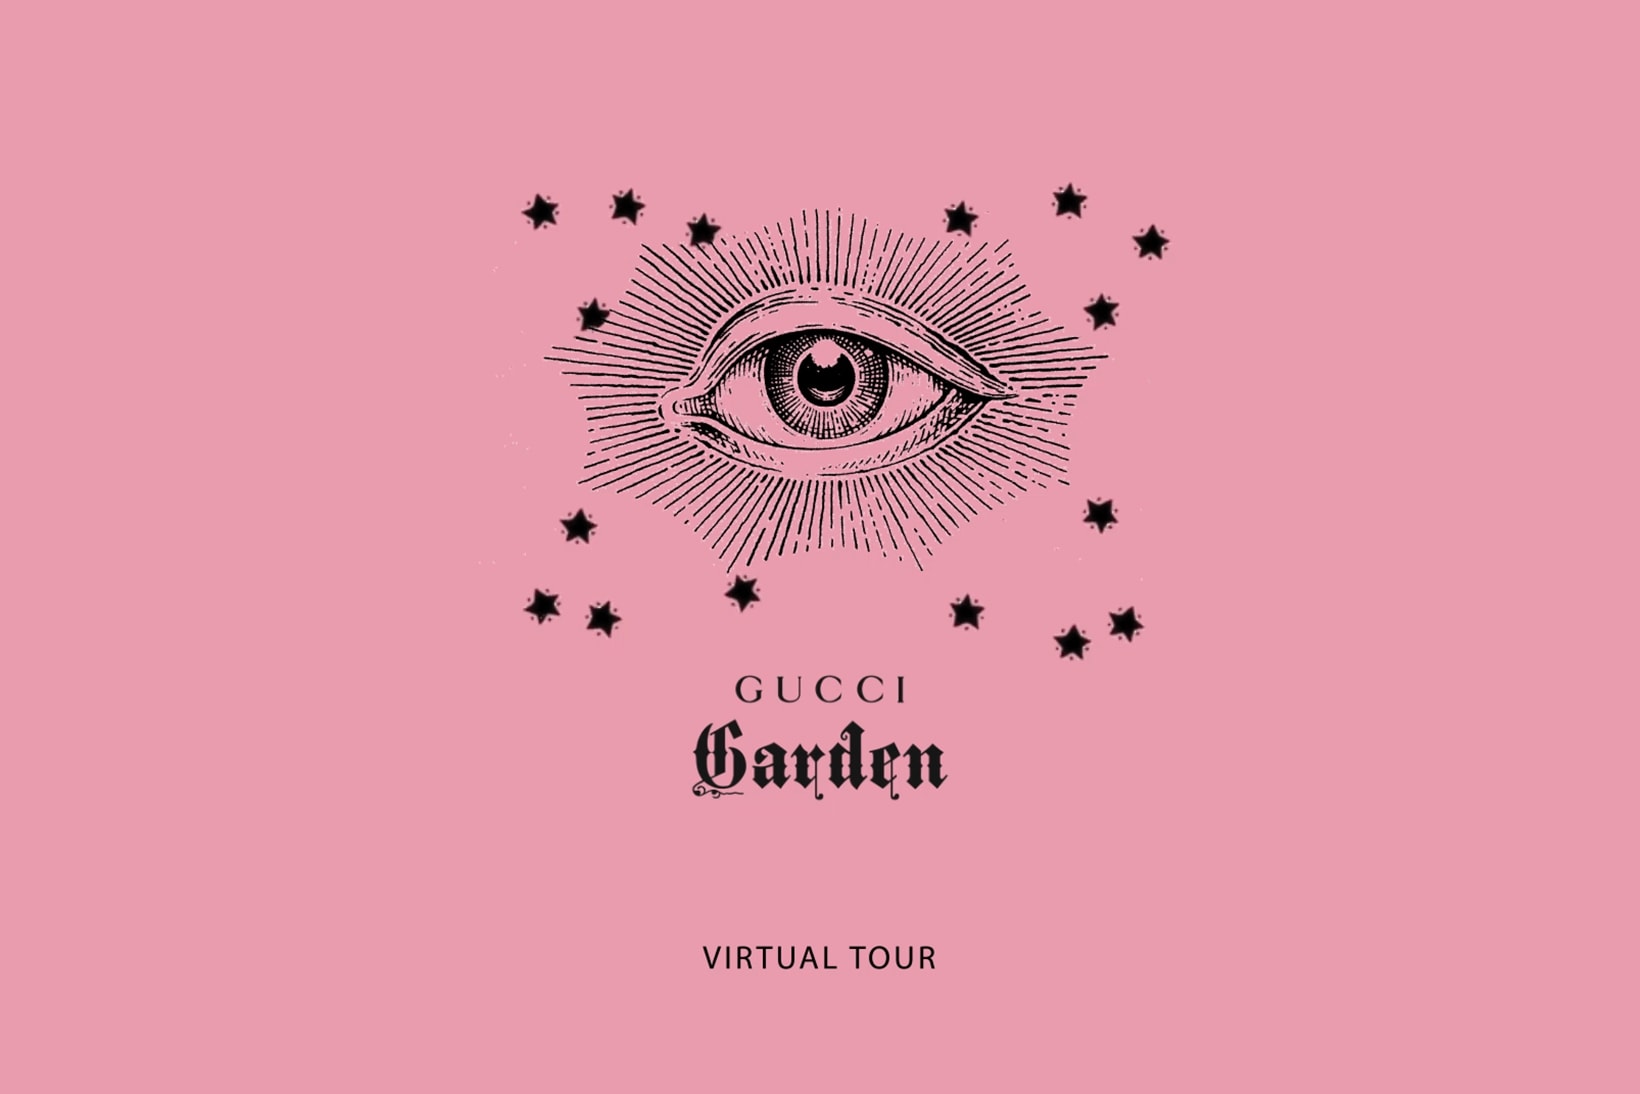 gucci garden virtual online tour italy florence alessandro michele